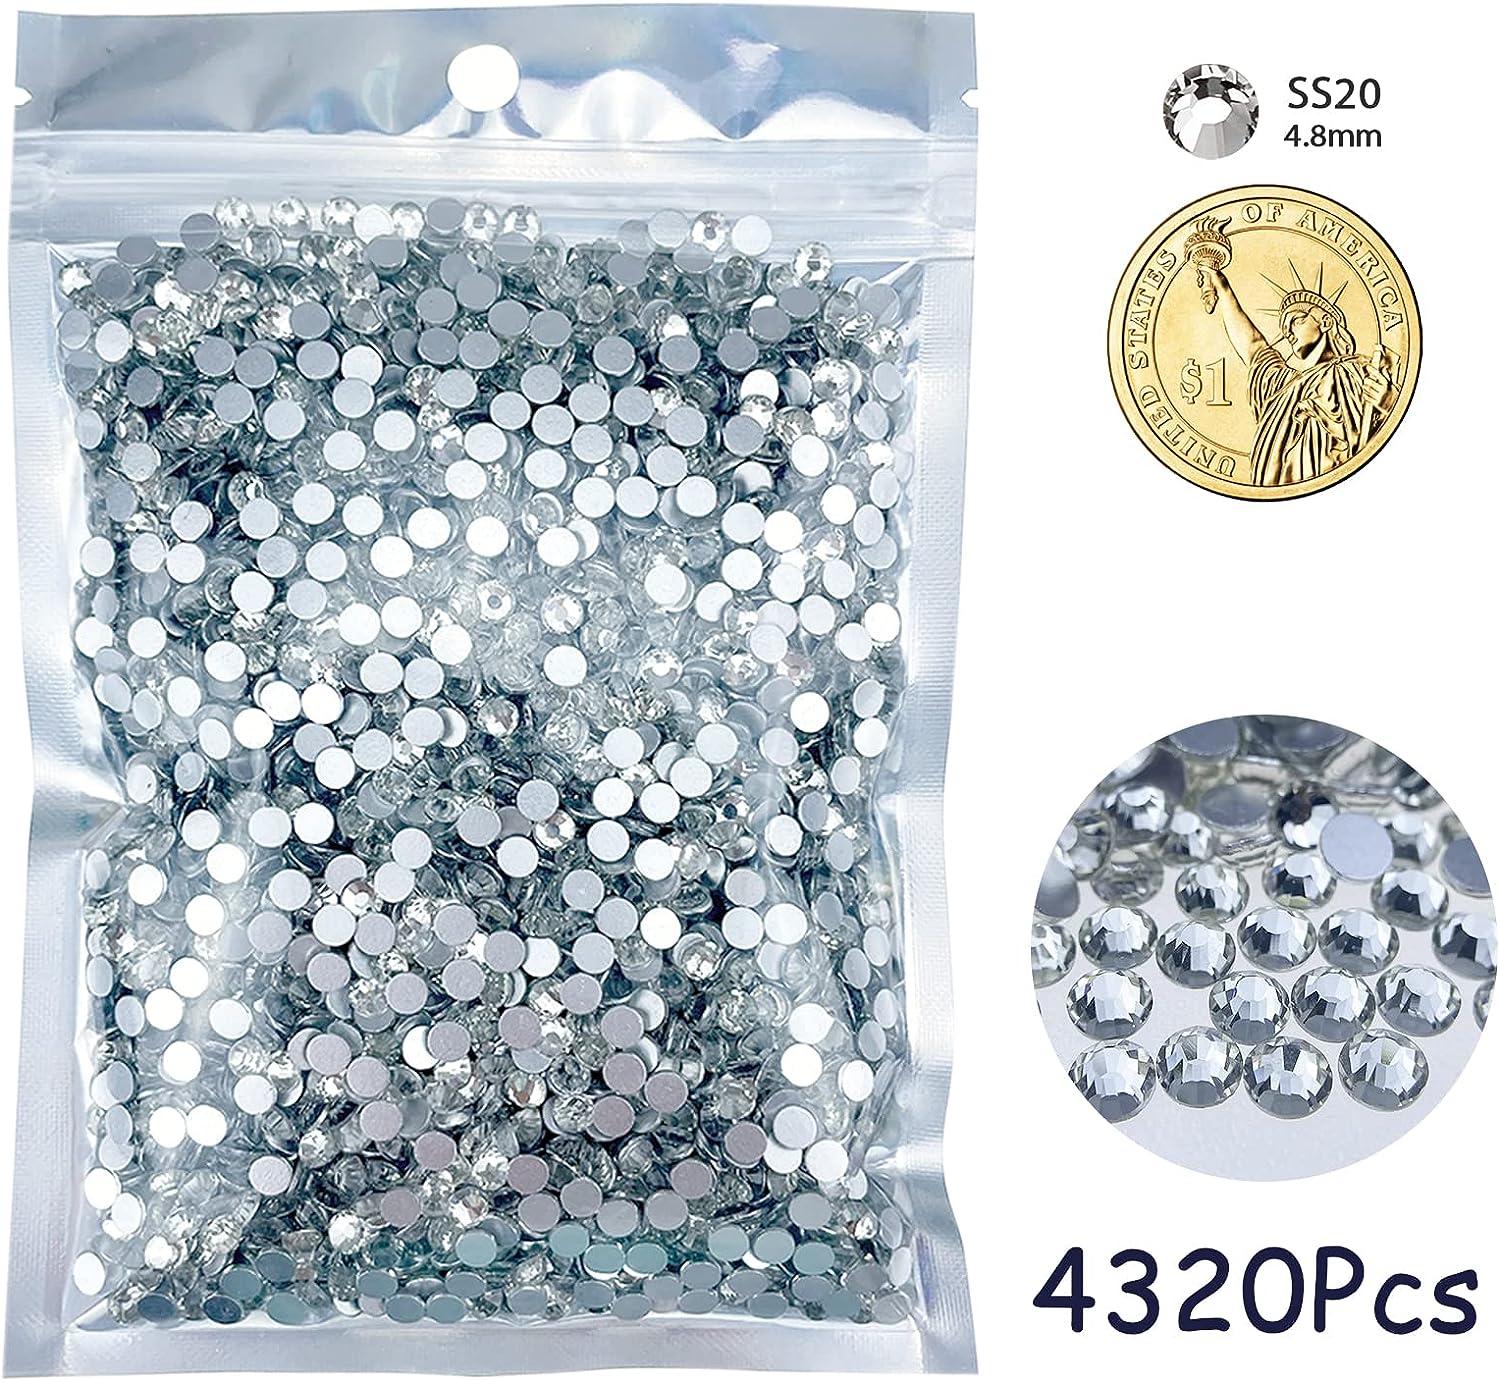 4320Pcs SS20 Flatback Rhinestones for Crafts Bulk Clear-Crystals White  Craft Gems Jewels Glass Diamonds Stone 5mm-Silver Gems for Nails Dance  Costumes Clothes Shoes Tumblers DIY Wholesale HINABTRU Crystal Clear  Clear-Sto